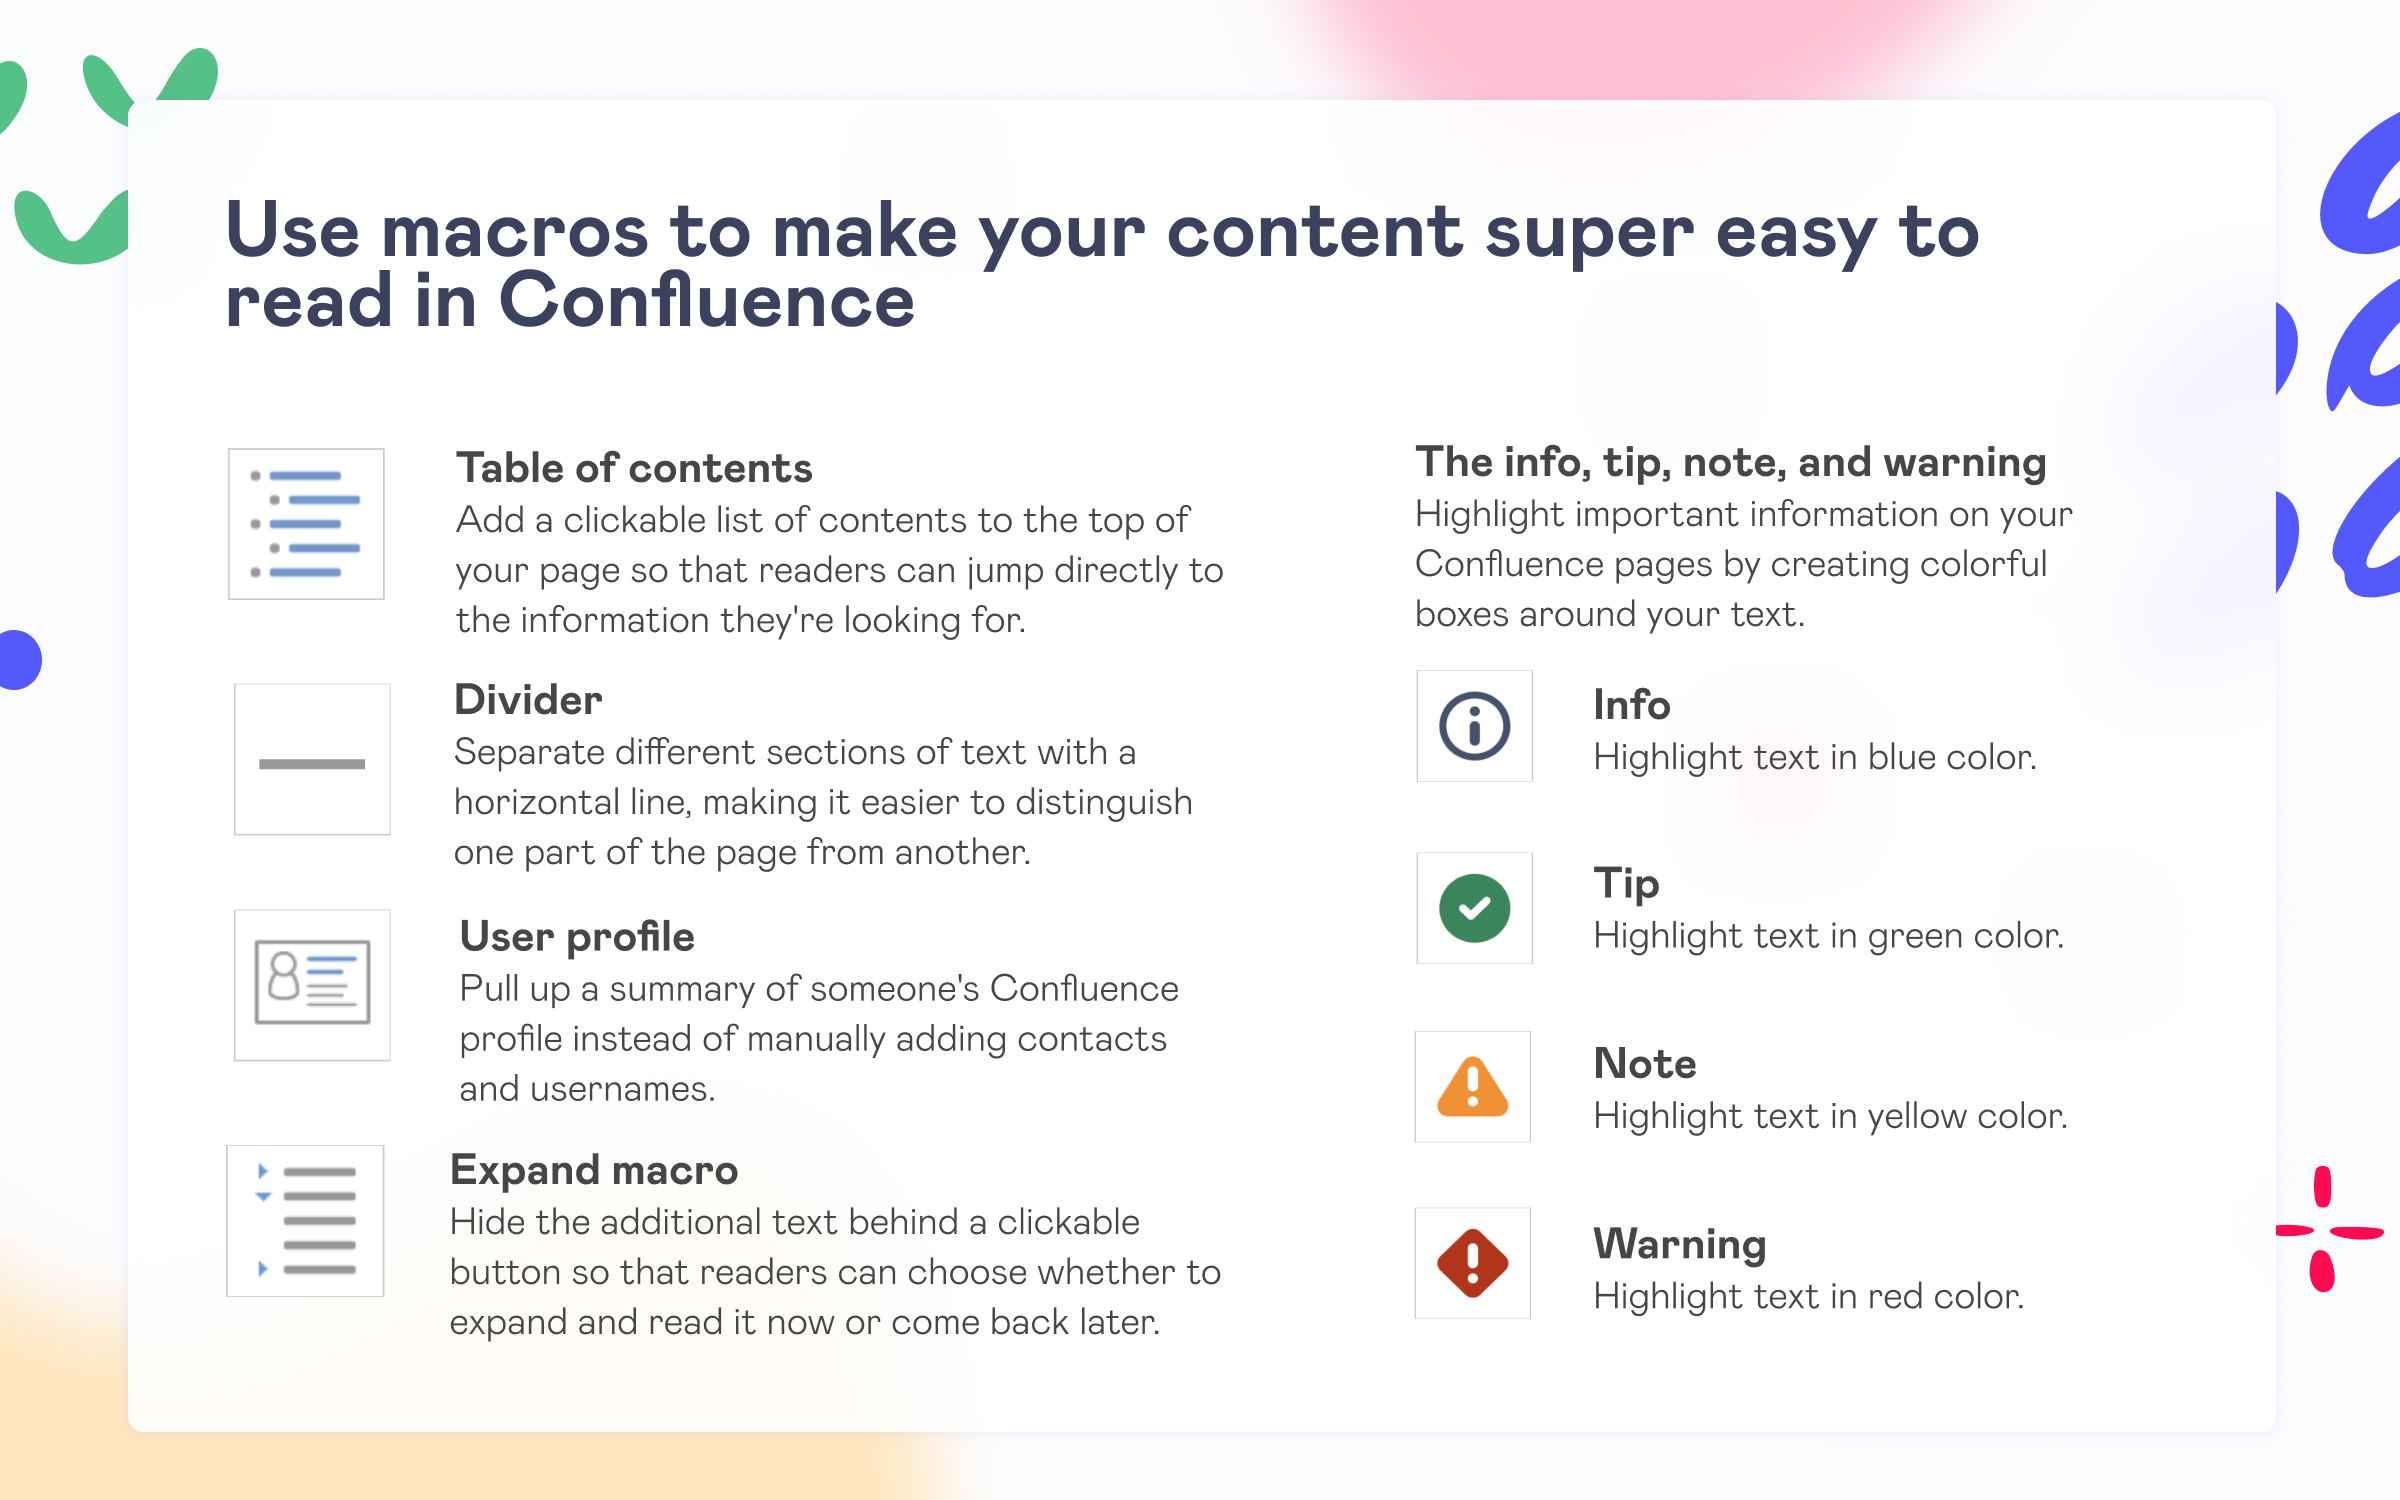 Use macros in Confluence to make content super easy to read